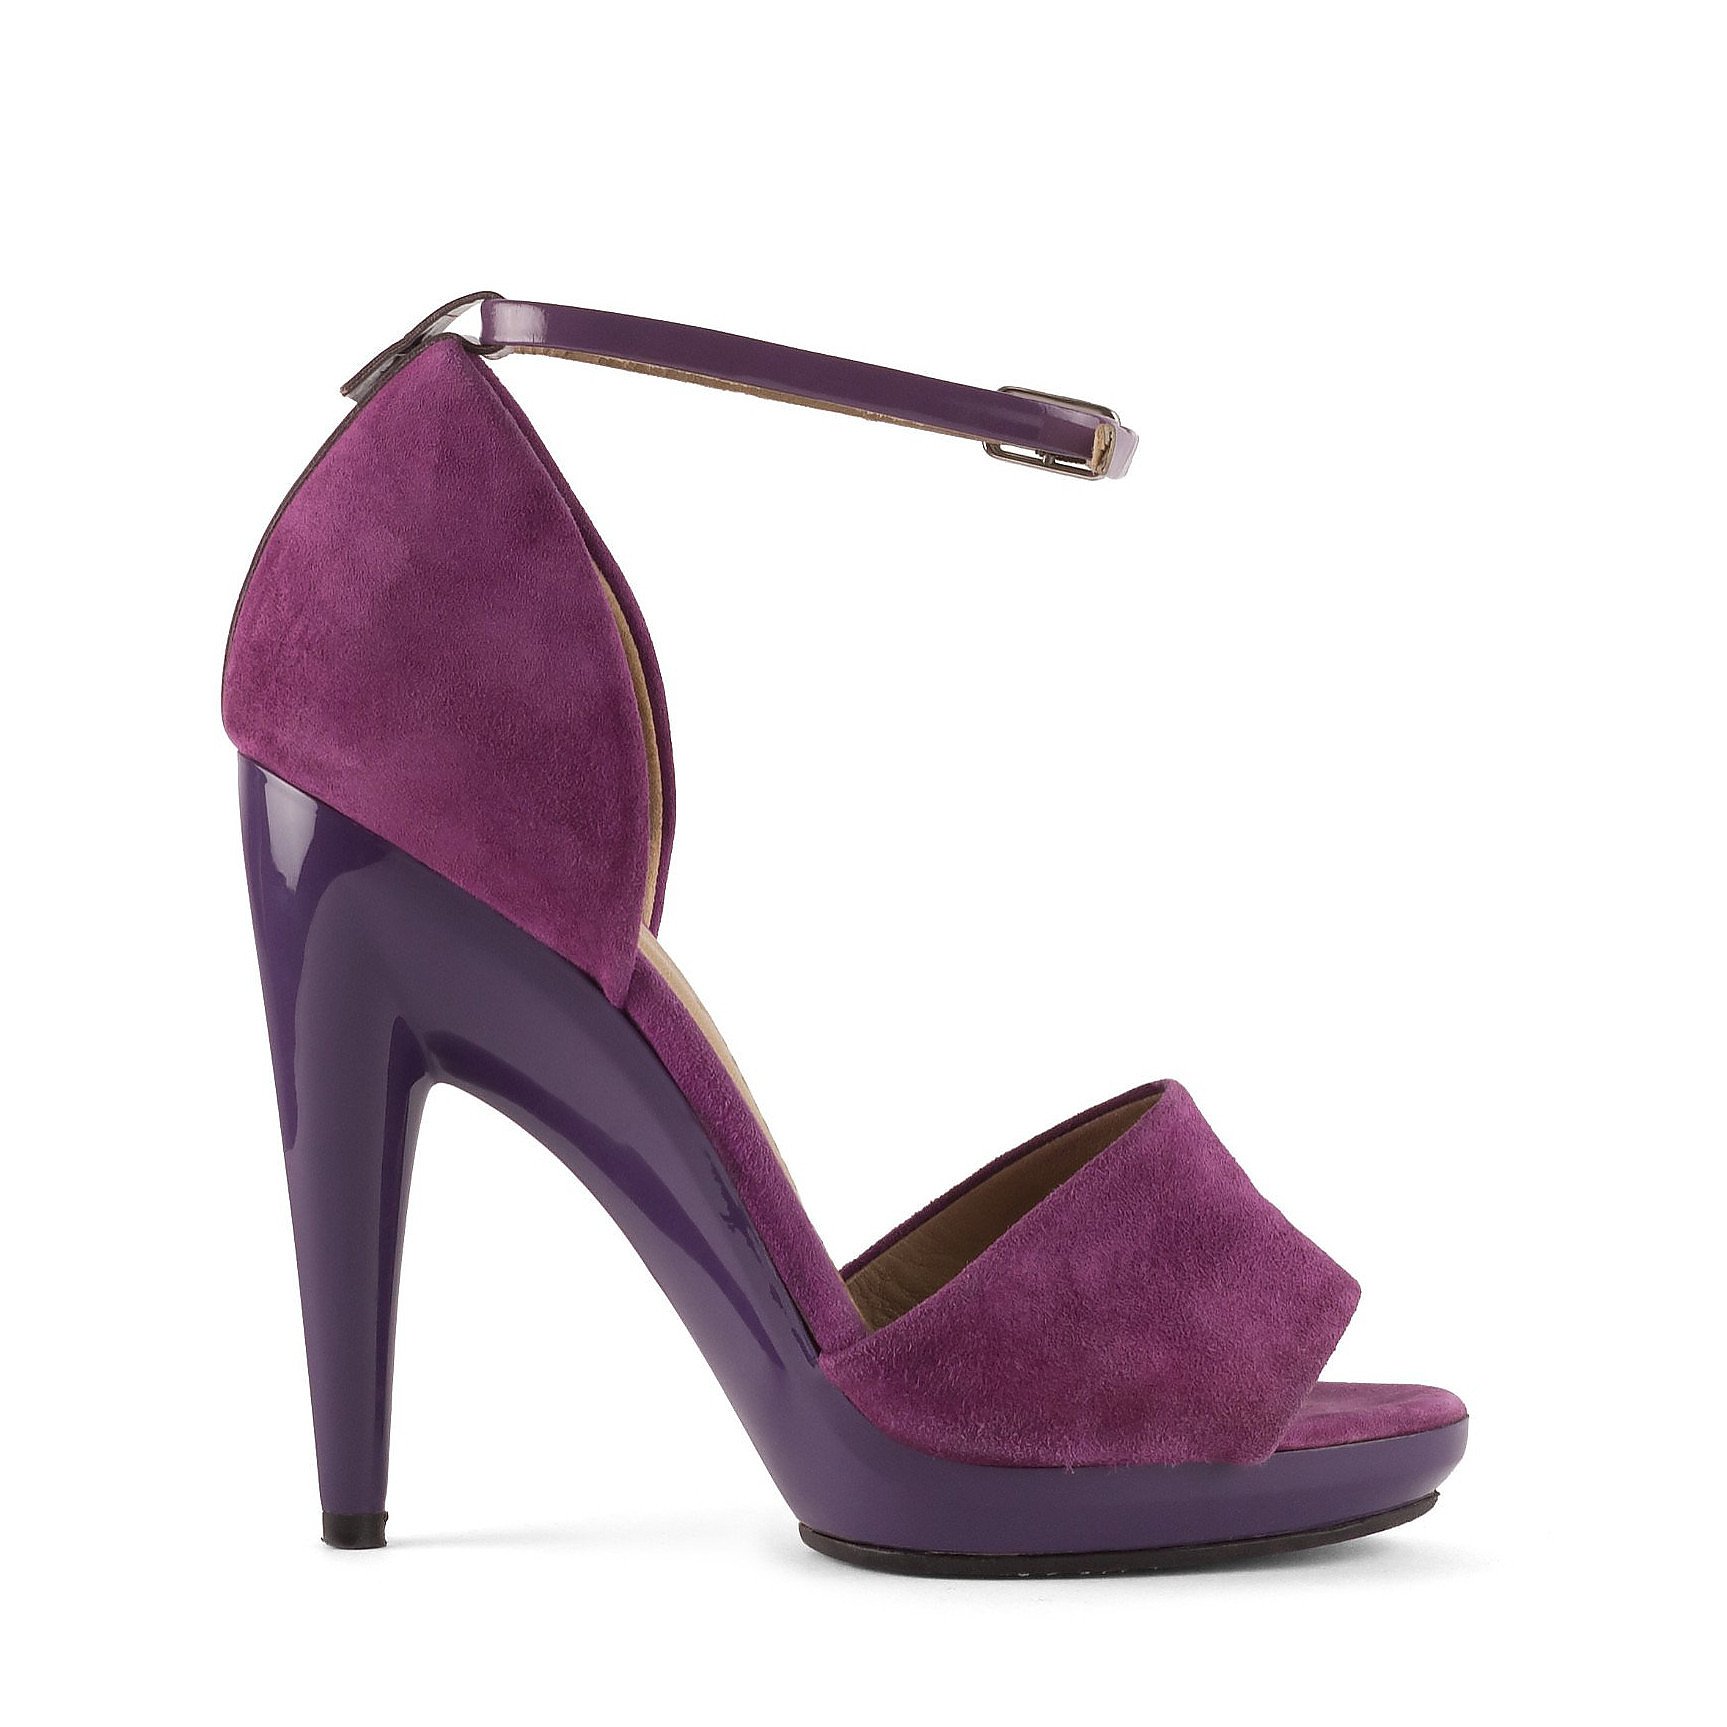 Chloé Suede Sandals With Lacquered Heel